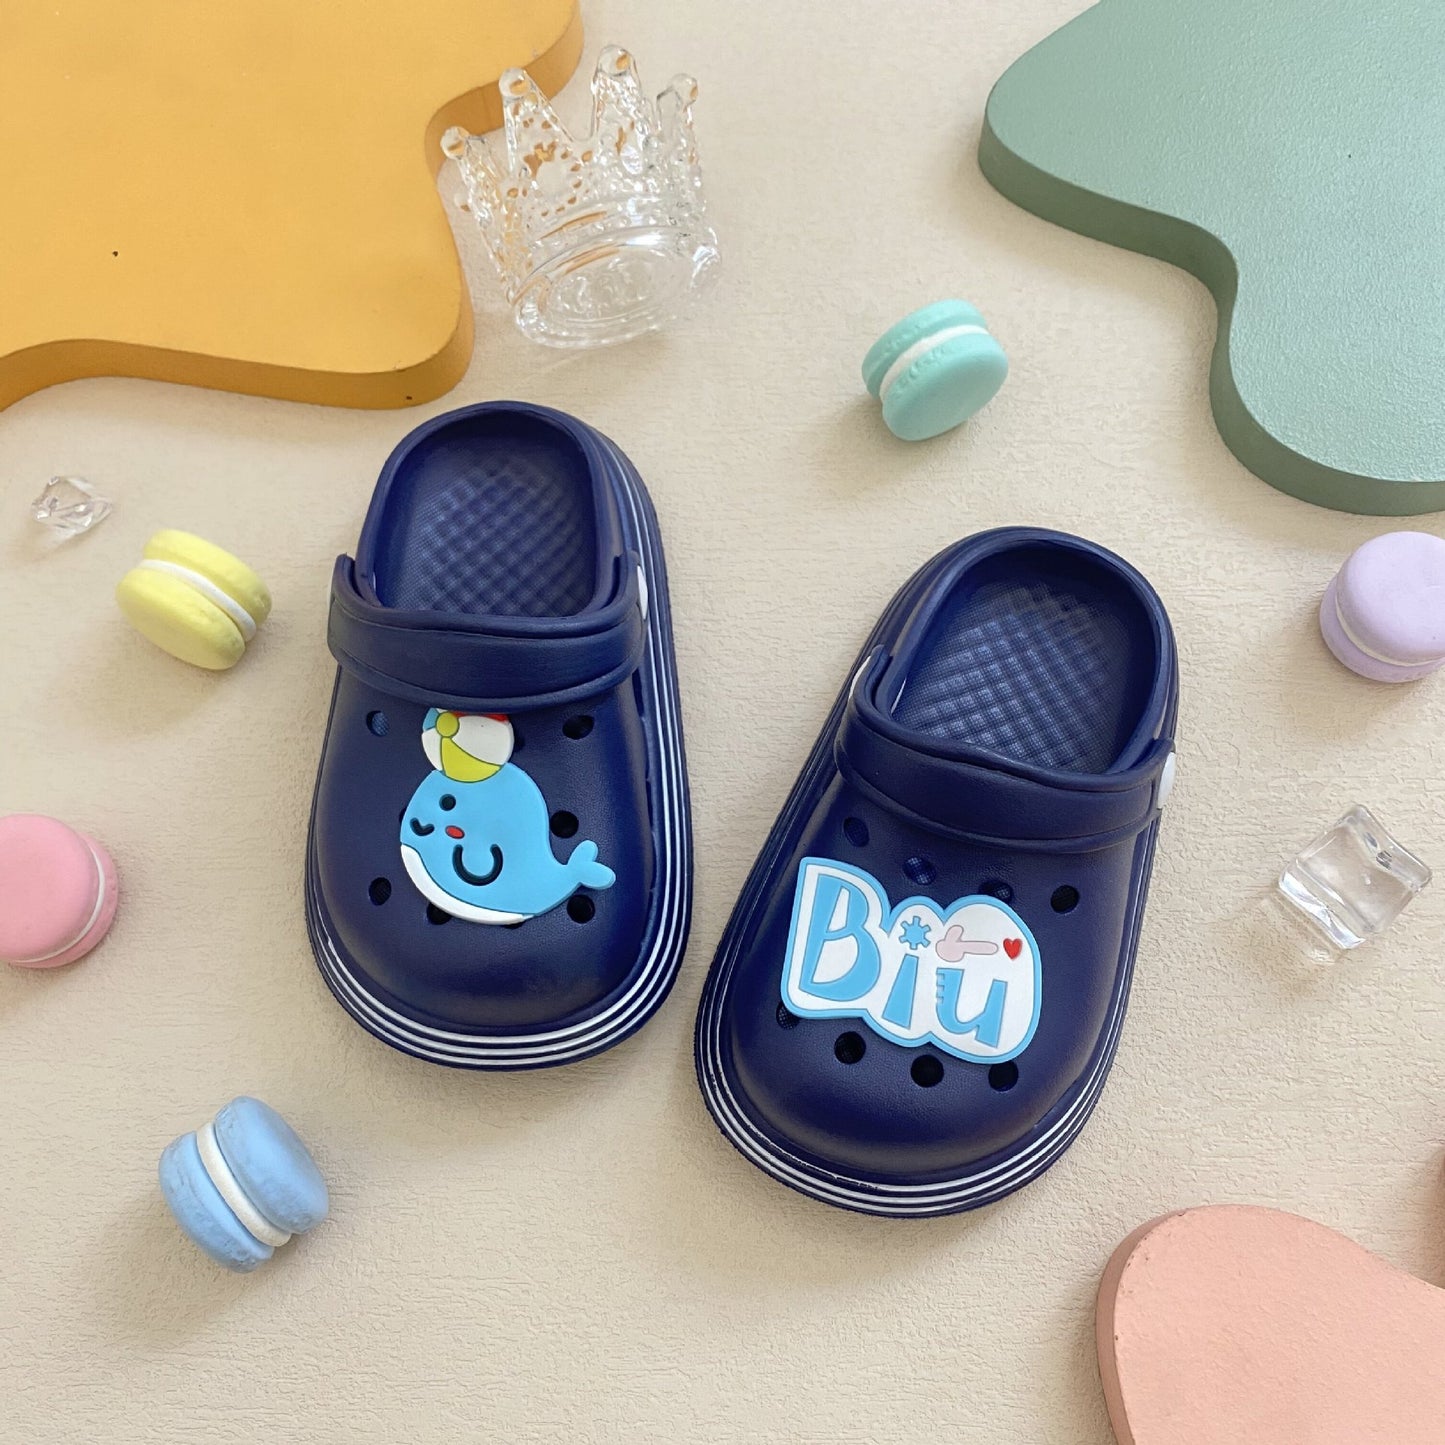 New Children's Hole Shoes Boys And Girls Summer Cute Outer Wear Toddler Soft Bottom Sandals And Slippers